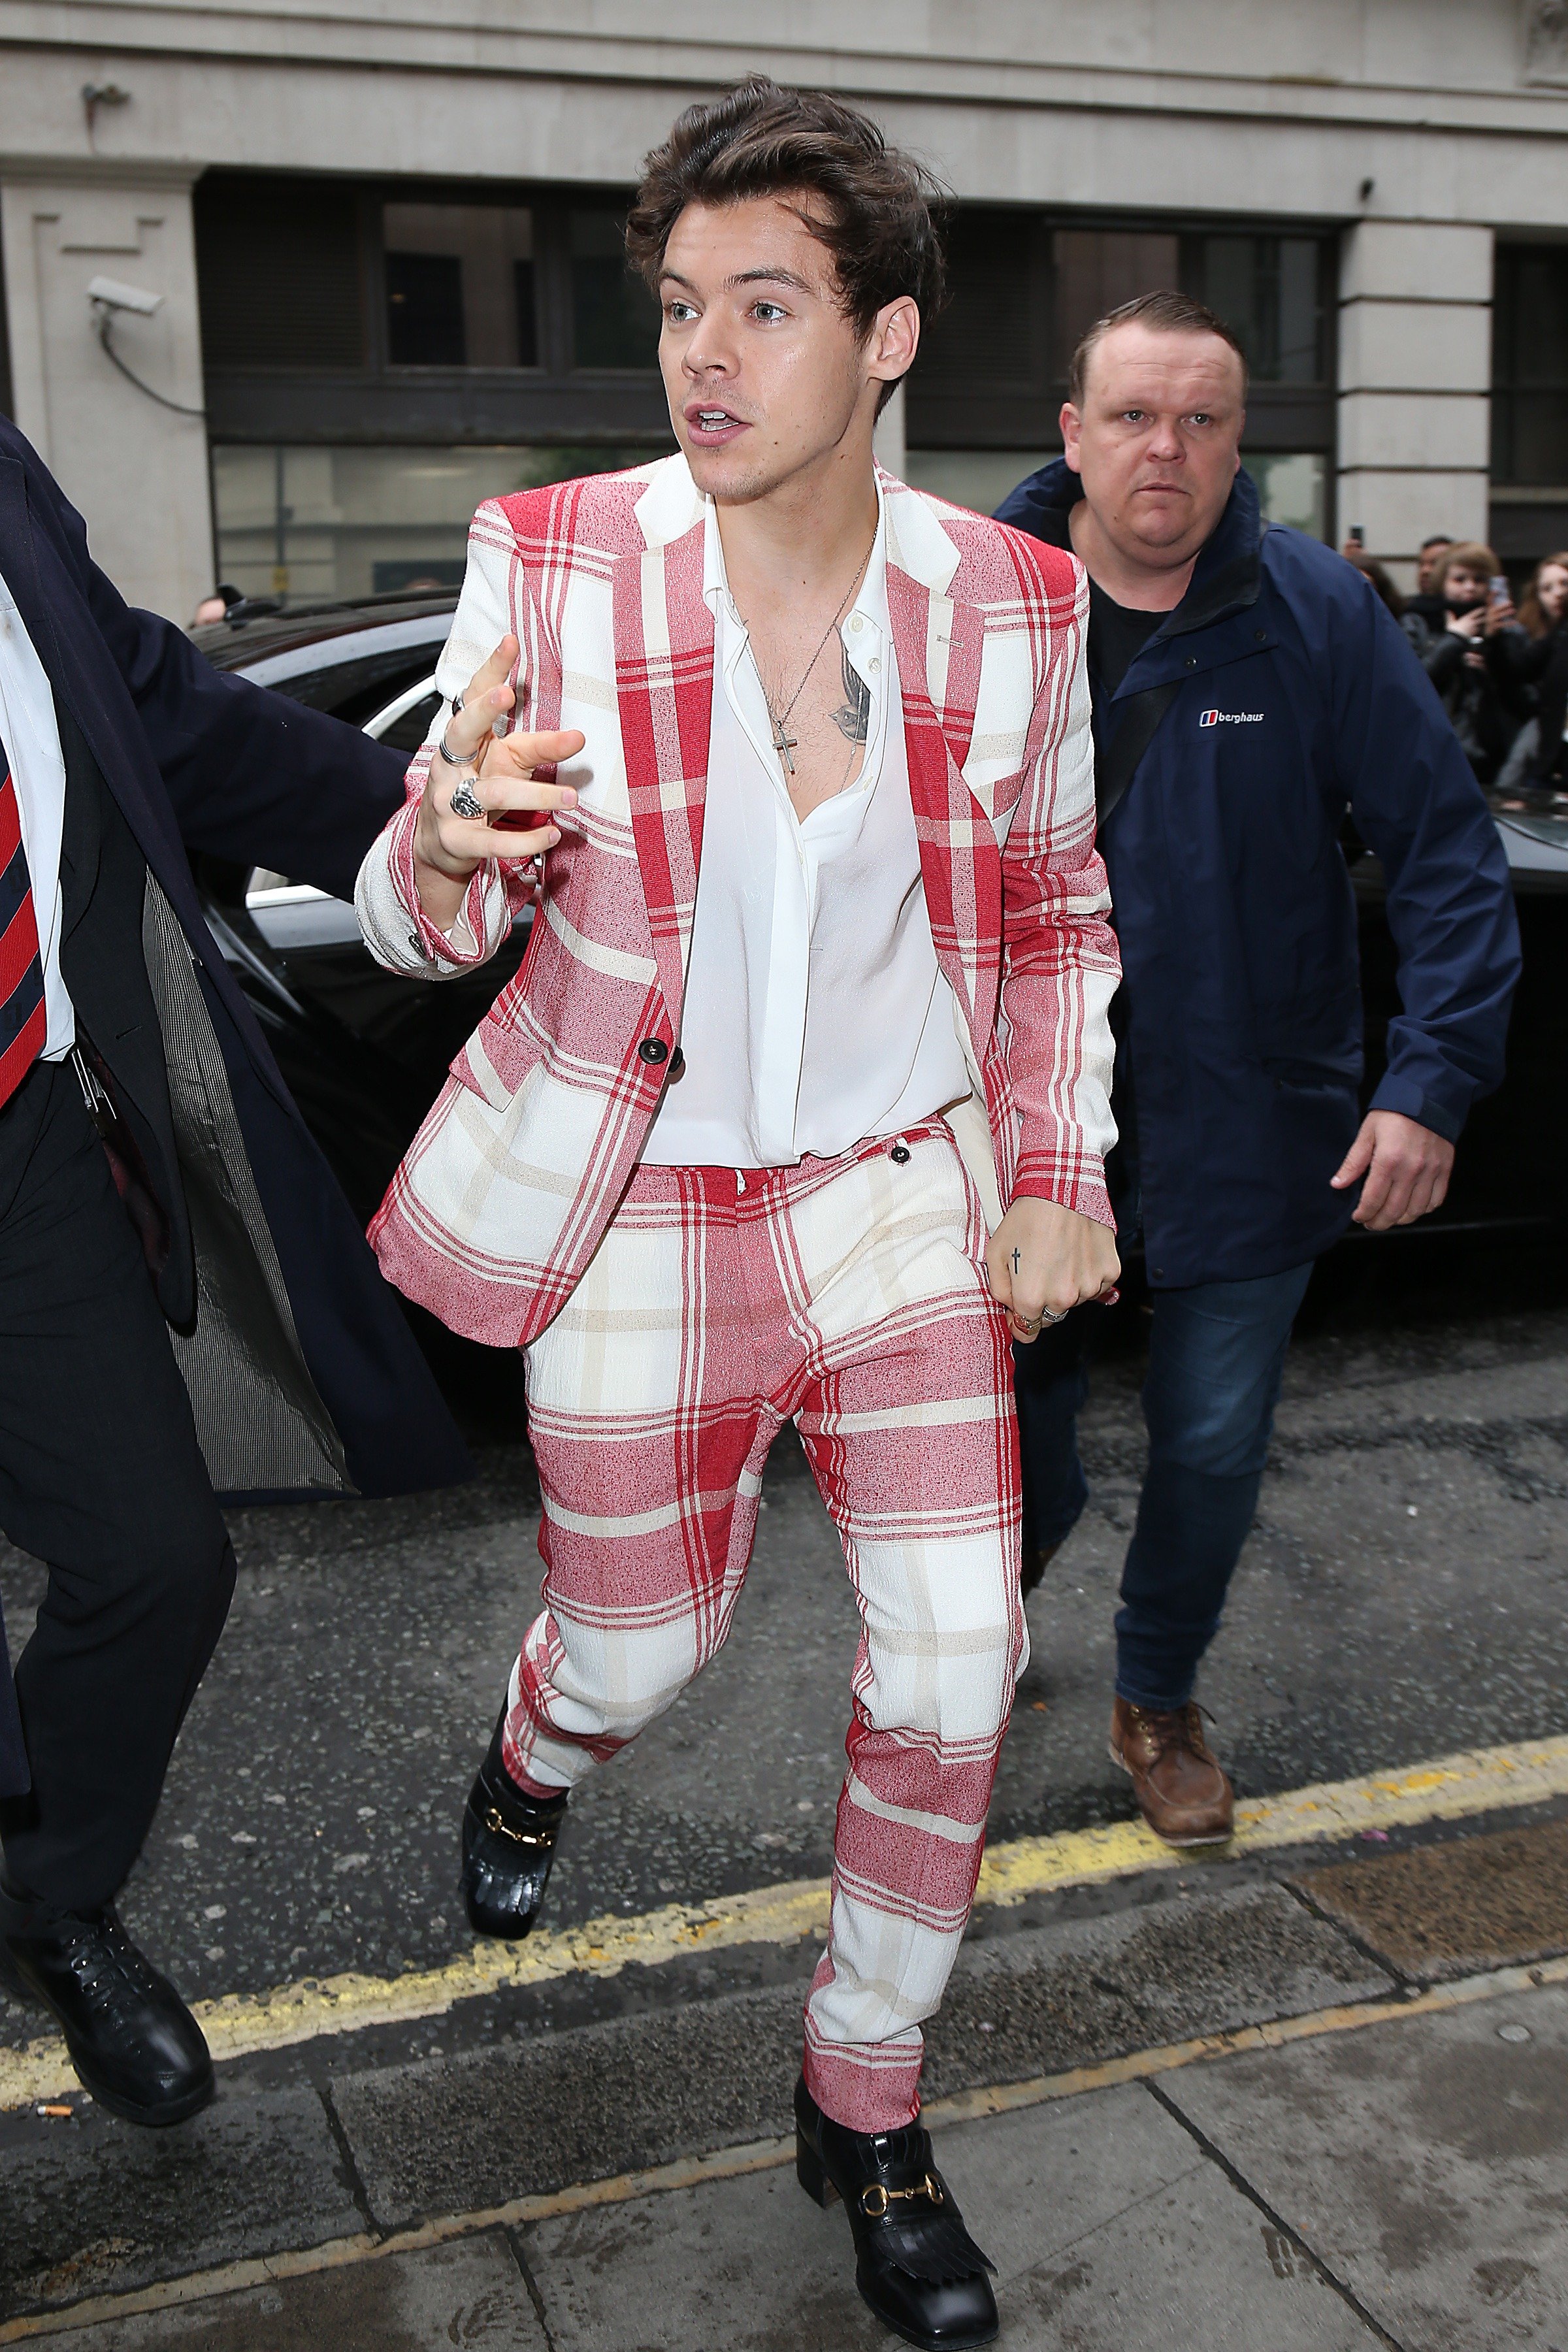 Harry Styles is seen at BBC Radio 2 Studios promoting his new album on May 12, 2017 in London